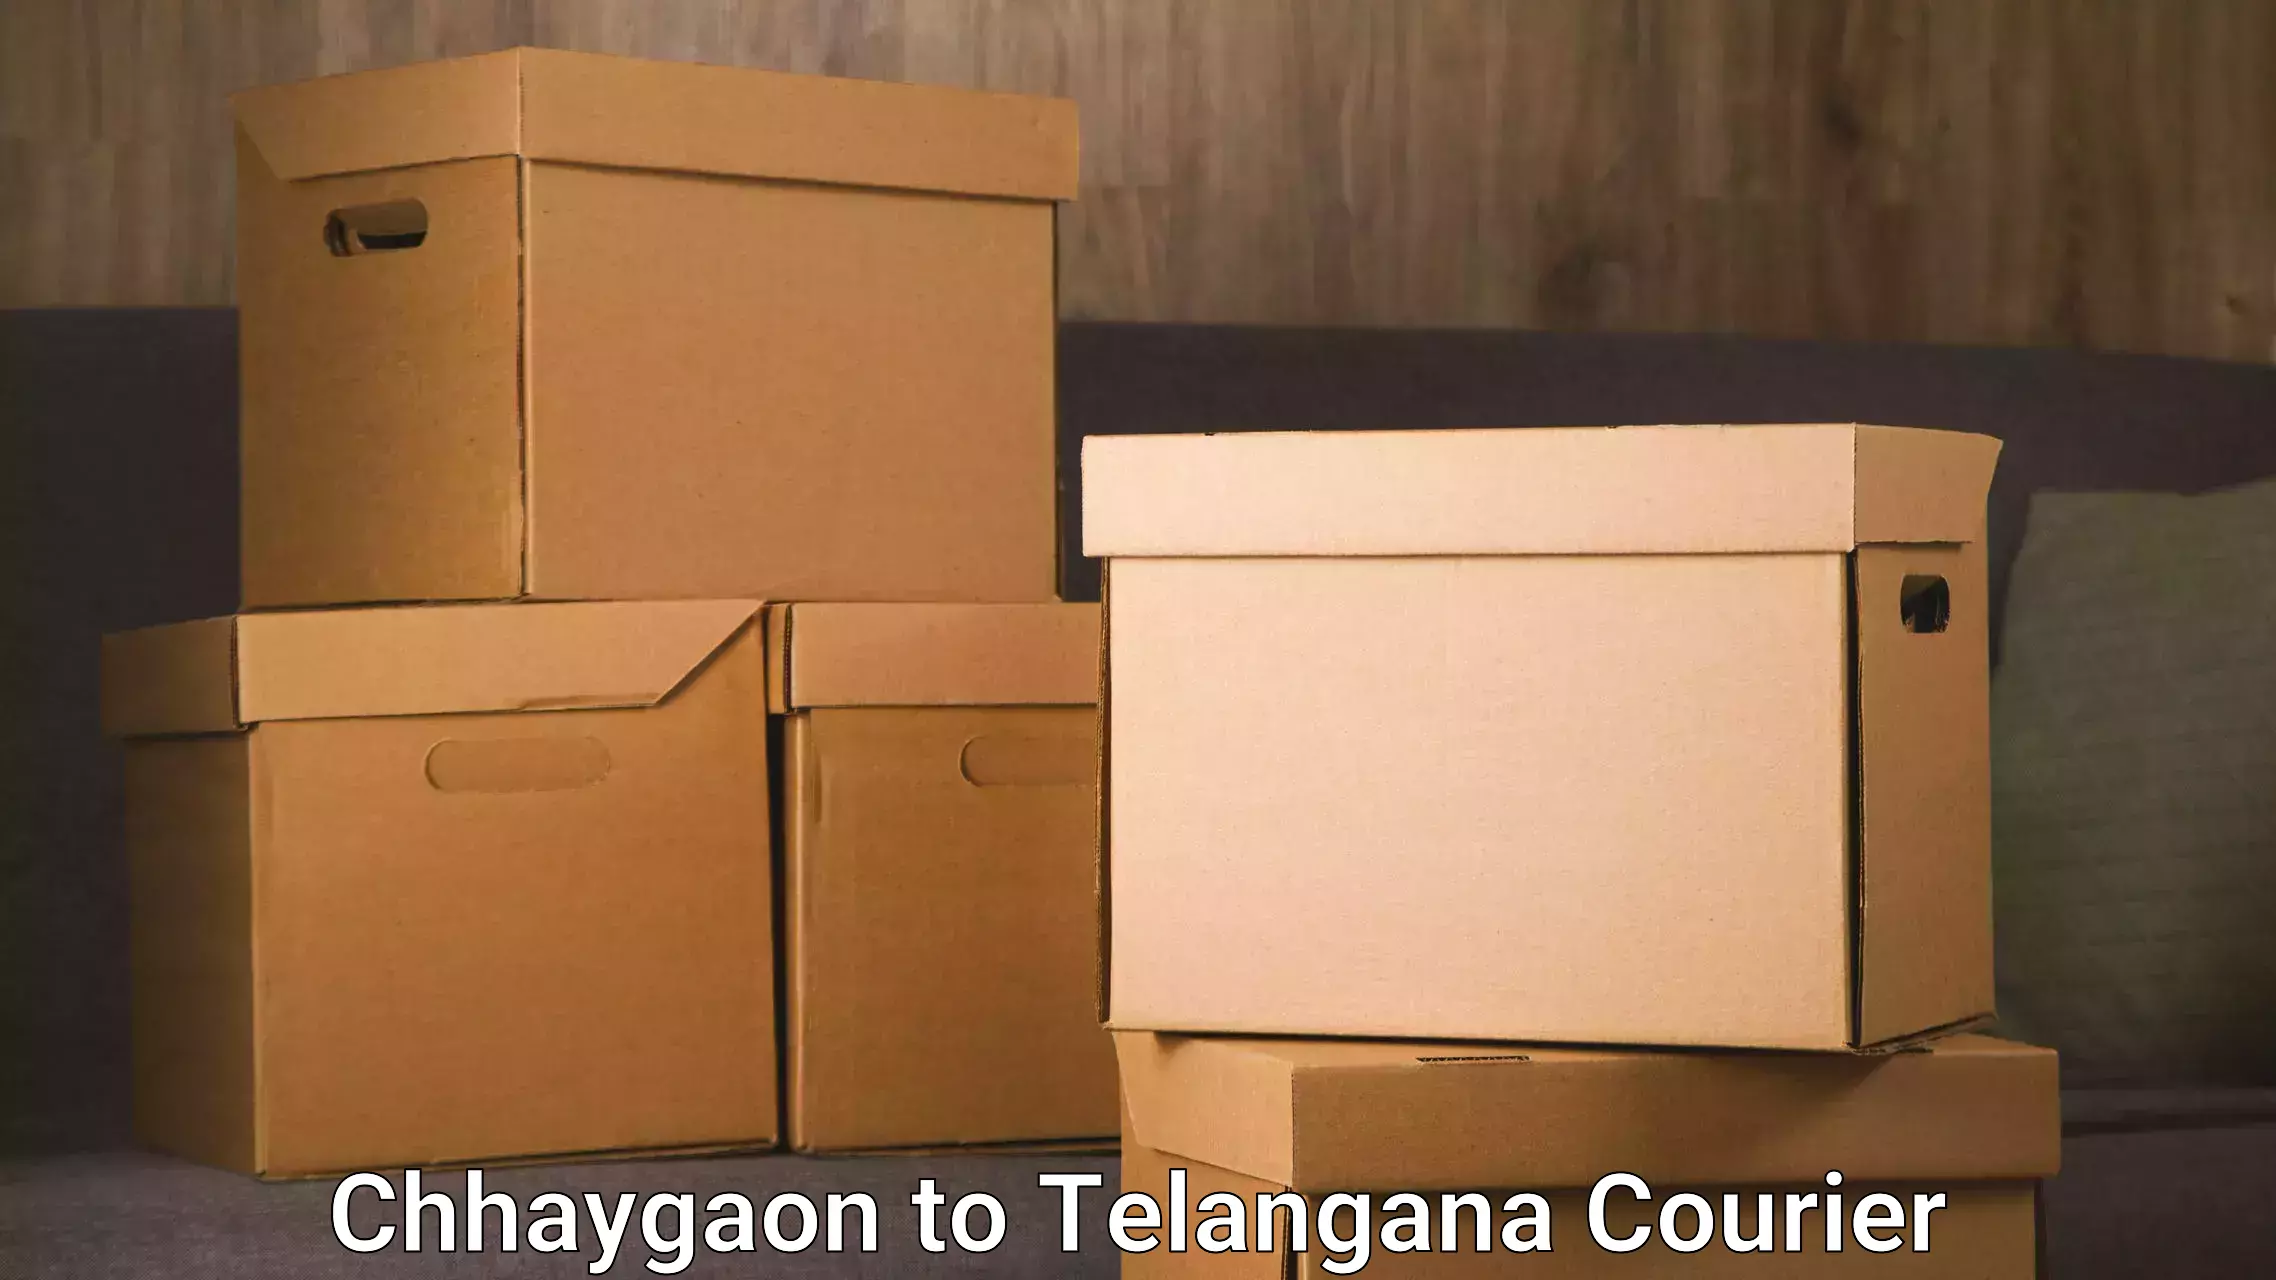 Reliable parcel services in Chhaygaon to Devarakonda